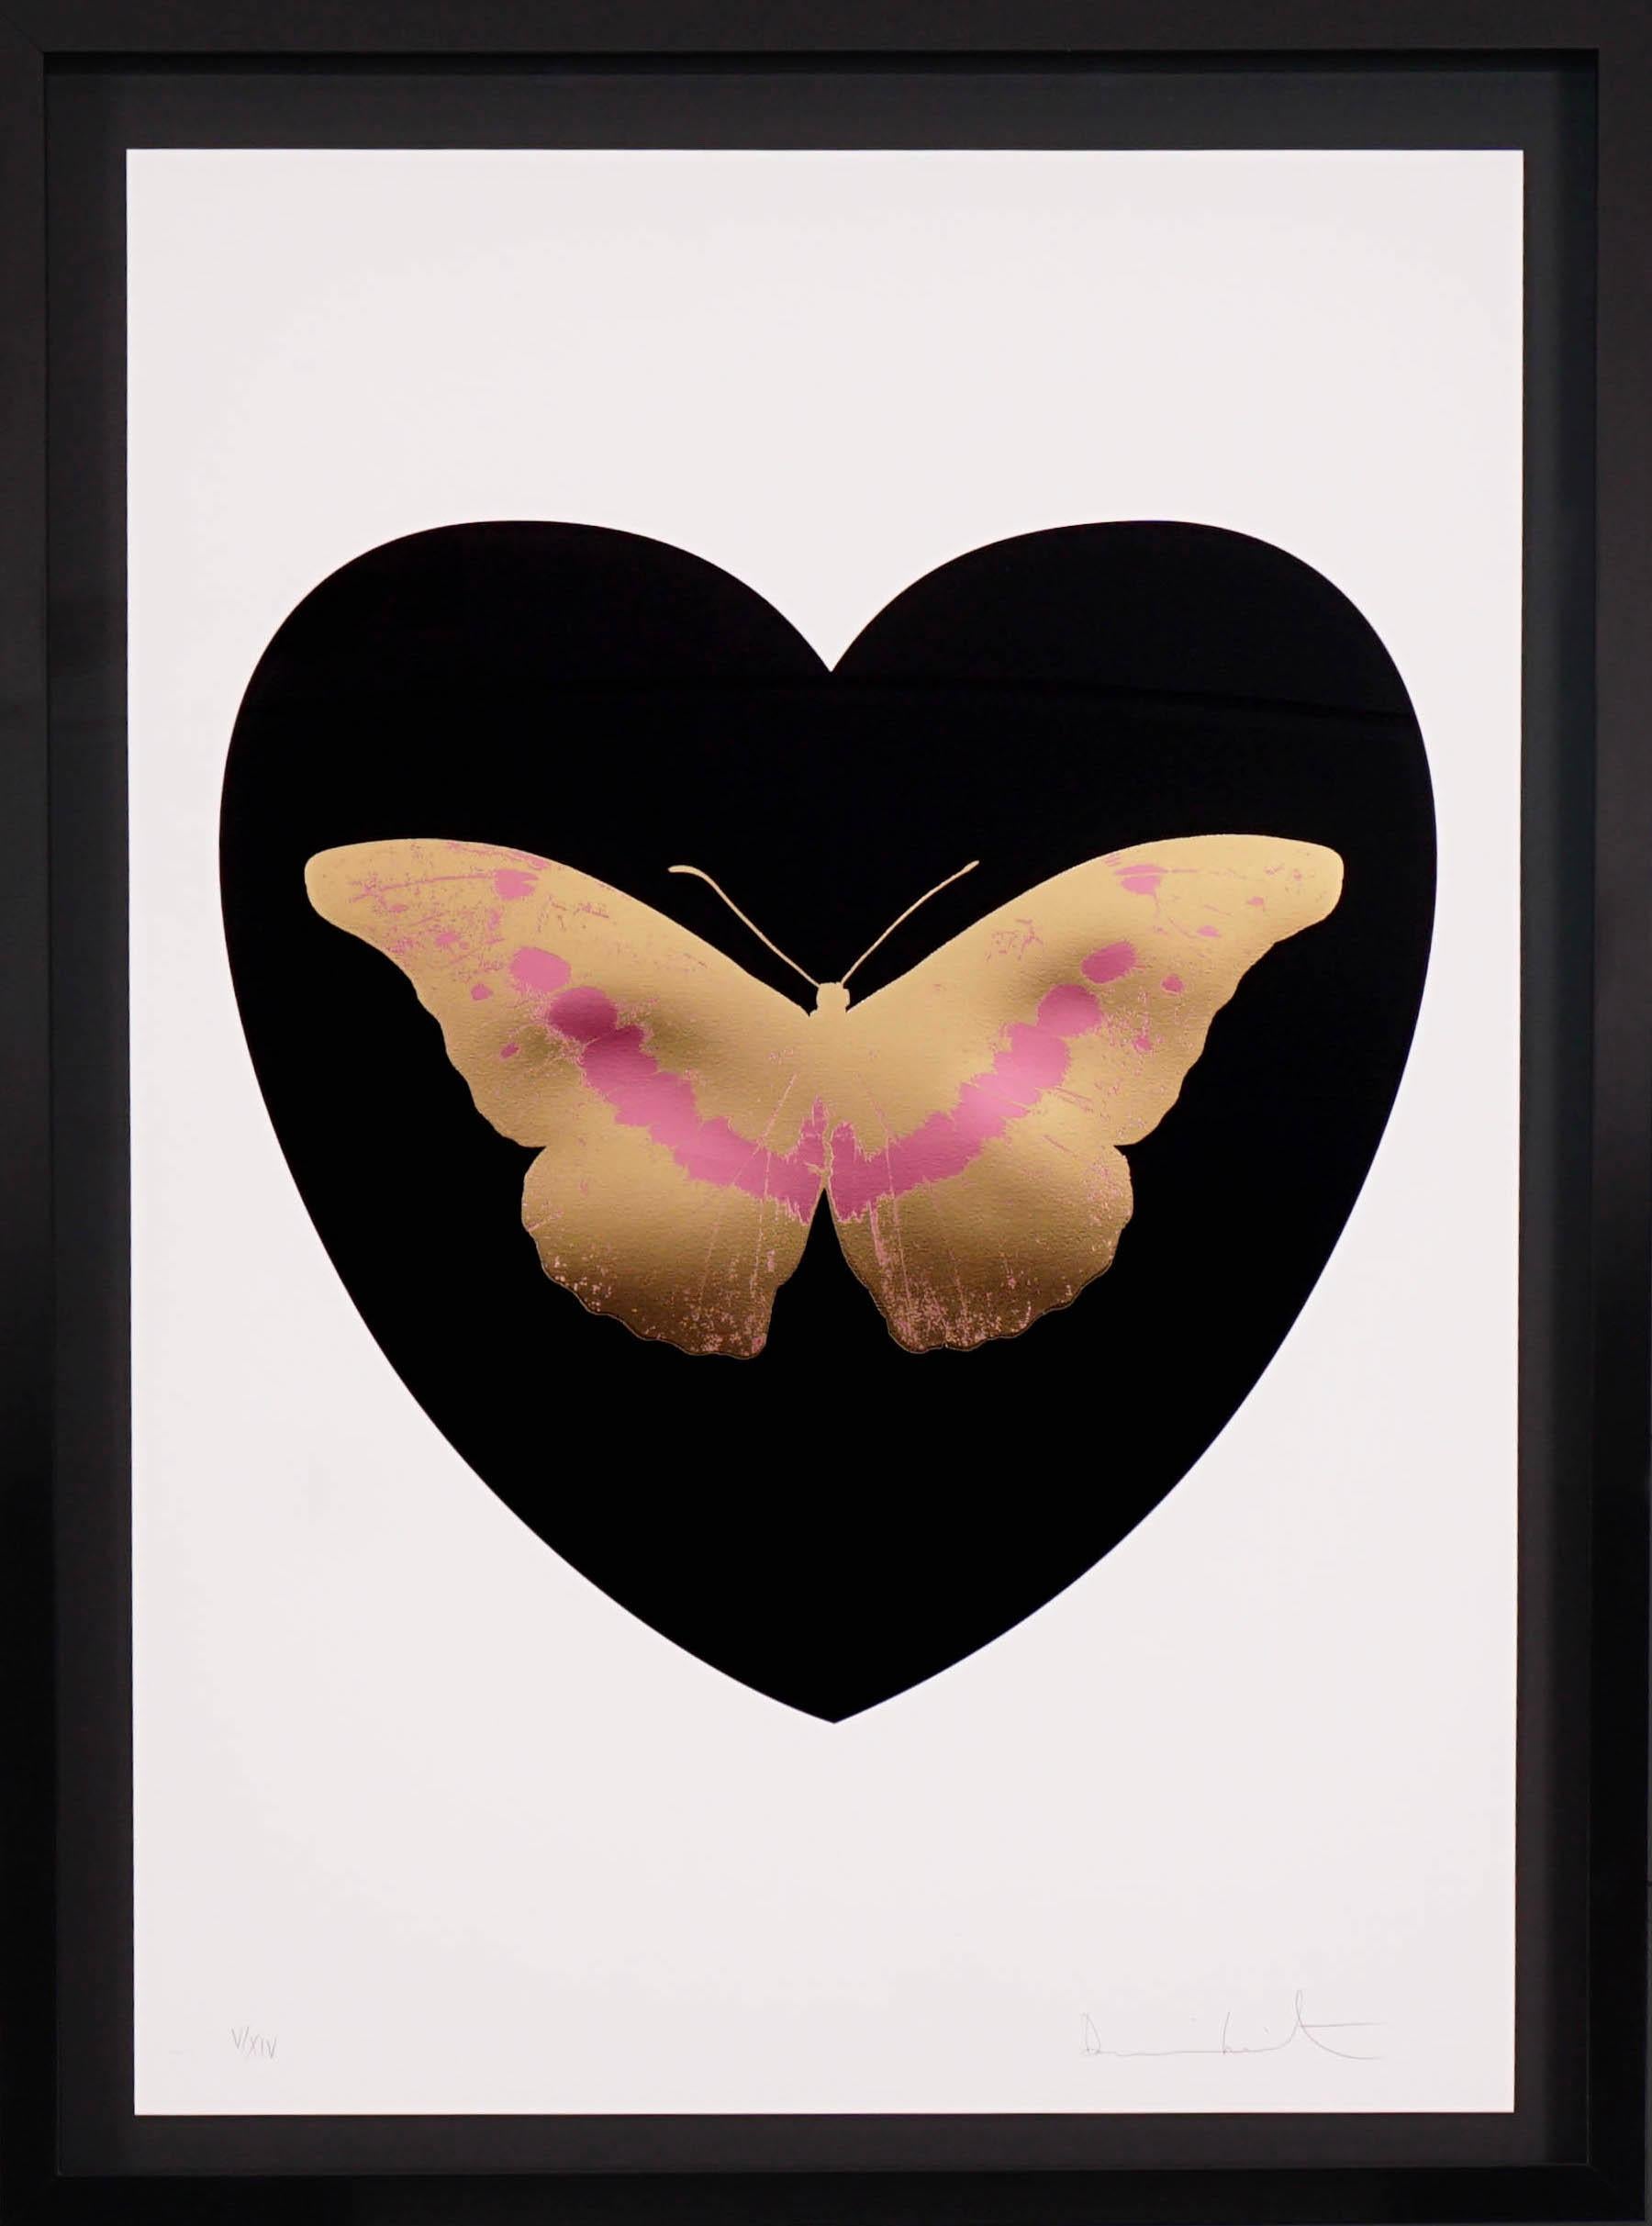 The 'I Love You' Butterfly in black, coral, and gold color scheme is a limited edition silkscreen print by Damien Hirst. This uplifting and pop art work features a gilded 24K gold leaf butterfly with coral detailing, surrounded by a jet balck heart